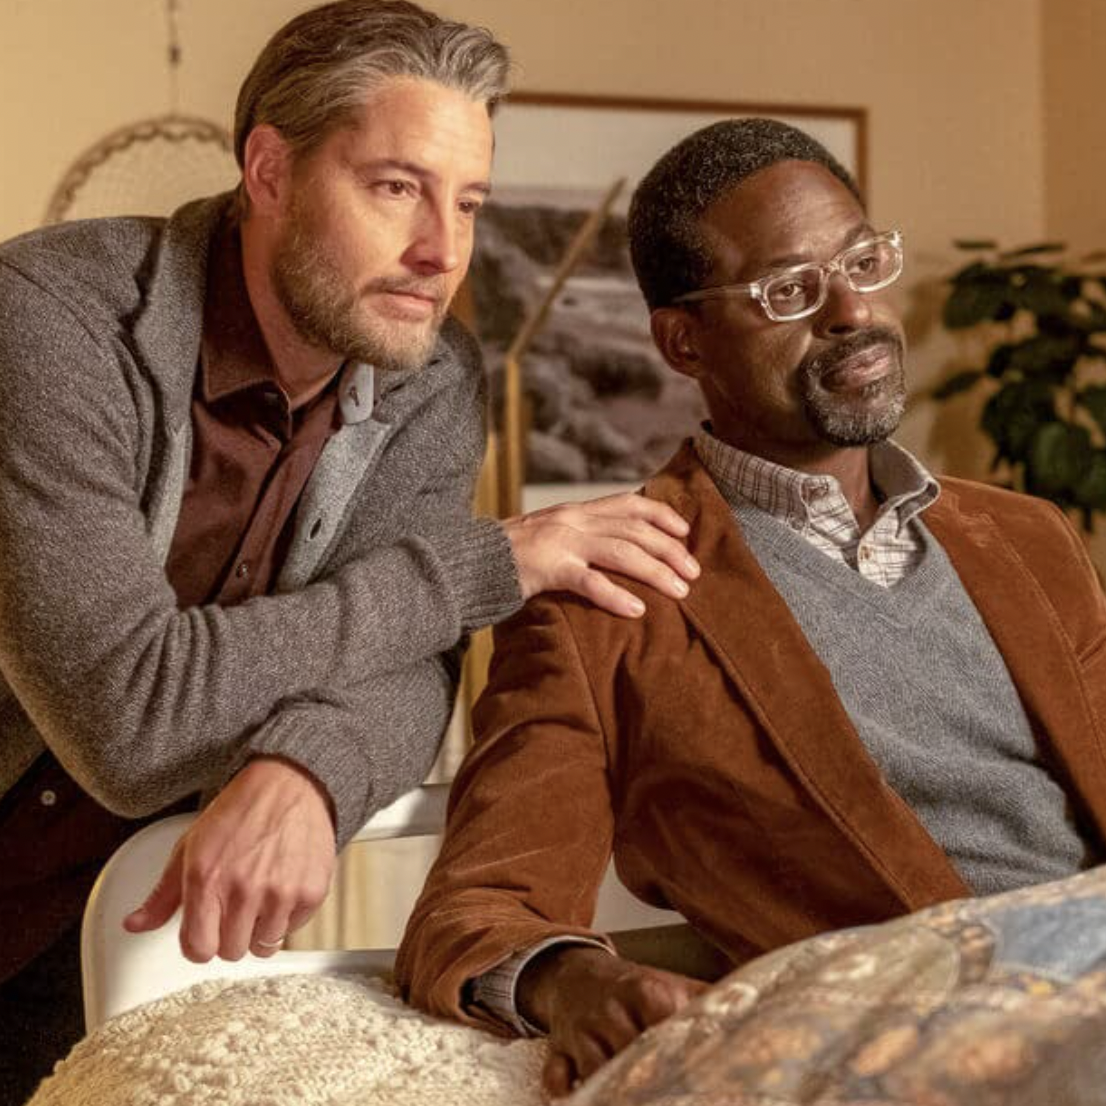 'This Is Us' Fans Are Spiraling Over the Penultimate Episode: 